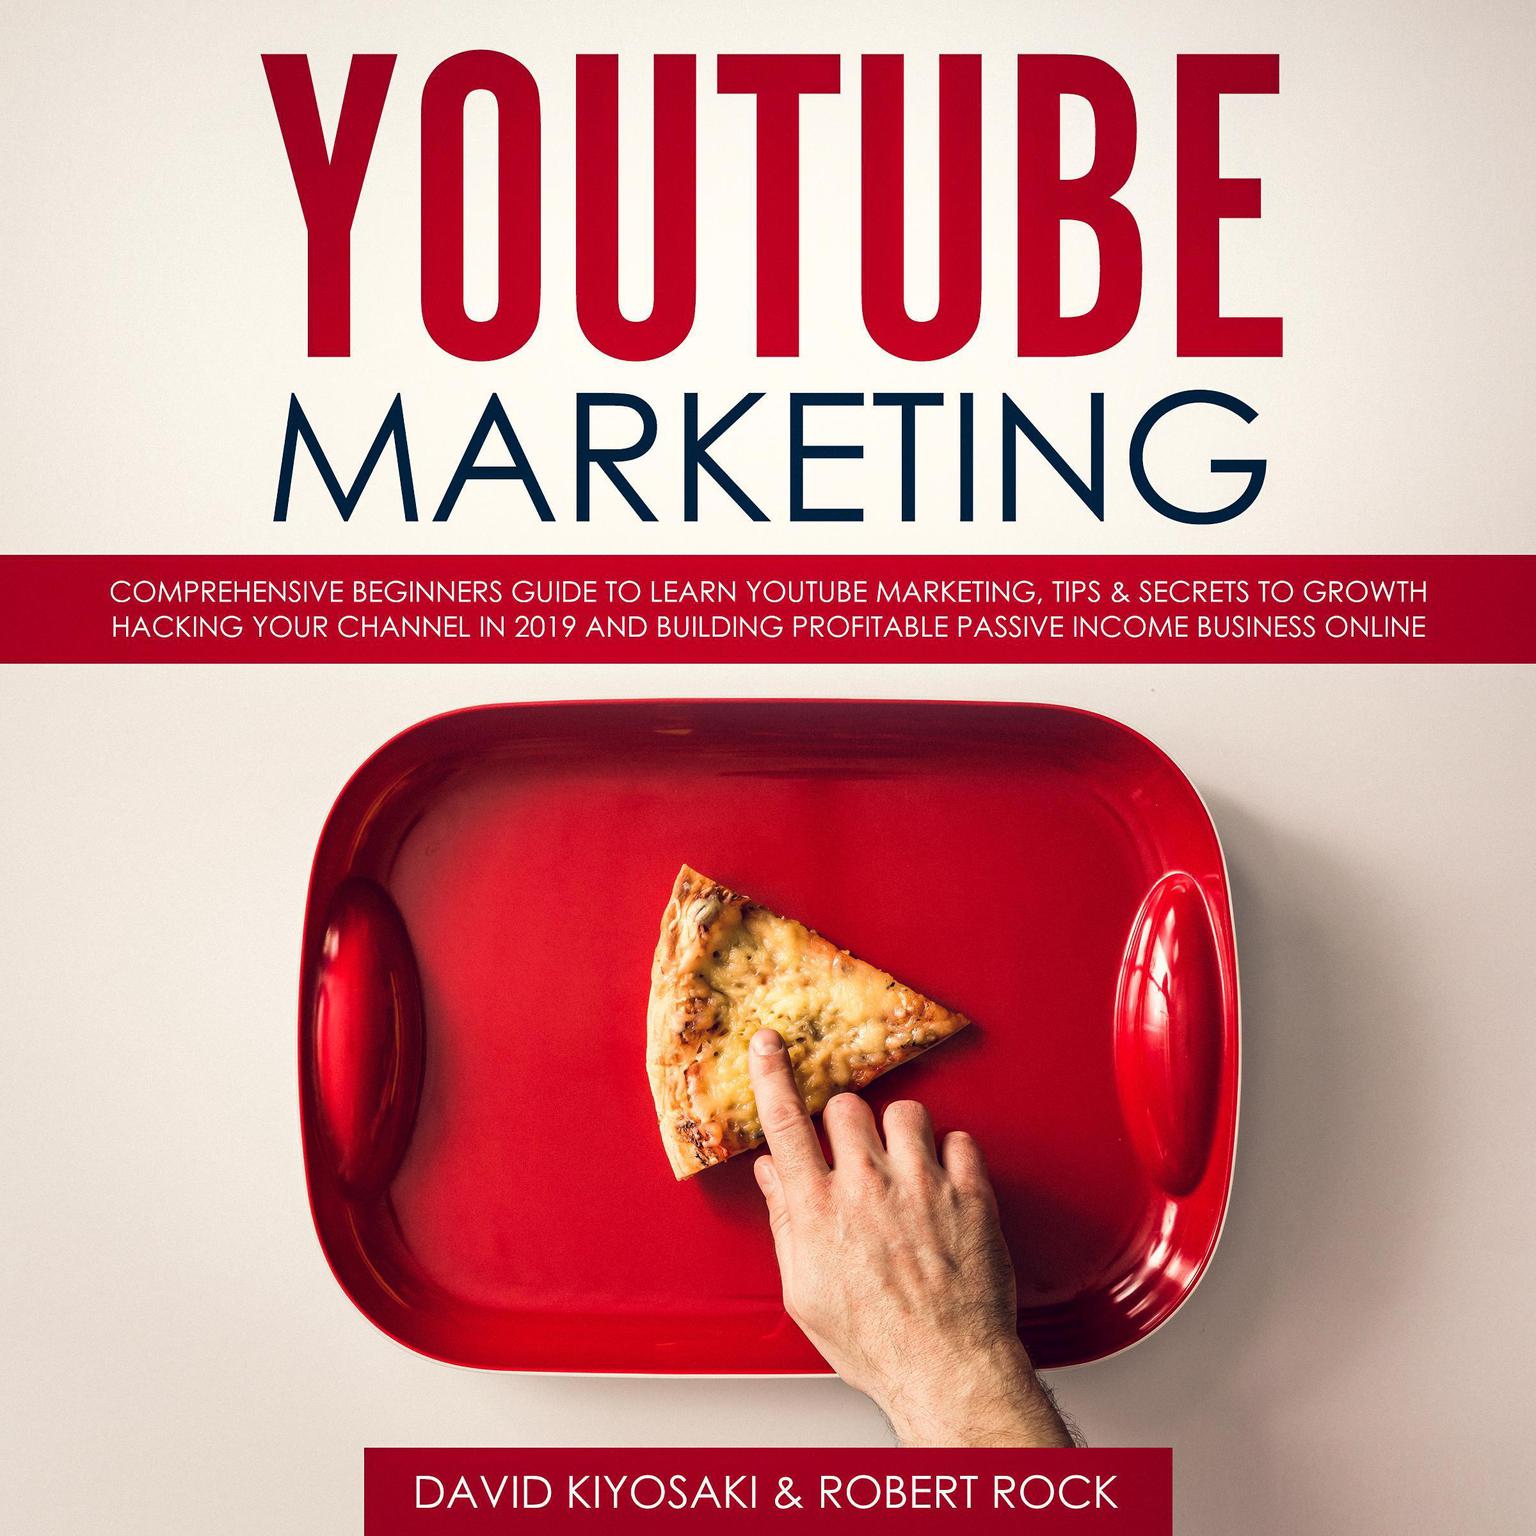 YouTube Marketing: Comprehensive Beginners Guide to Learn YouTube Marketing, Tips & Secrets to Growth Hacking Your Channel in 2019 and Building Profitable Passive Income Business Online Audiobook, by David Kiyosaki